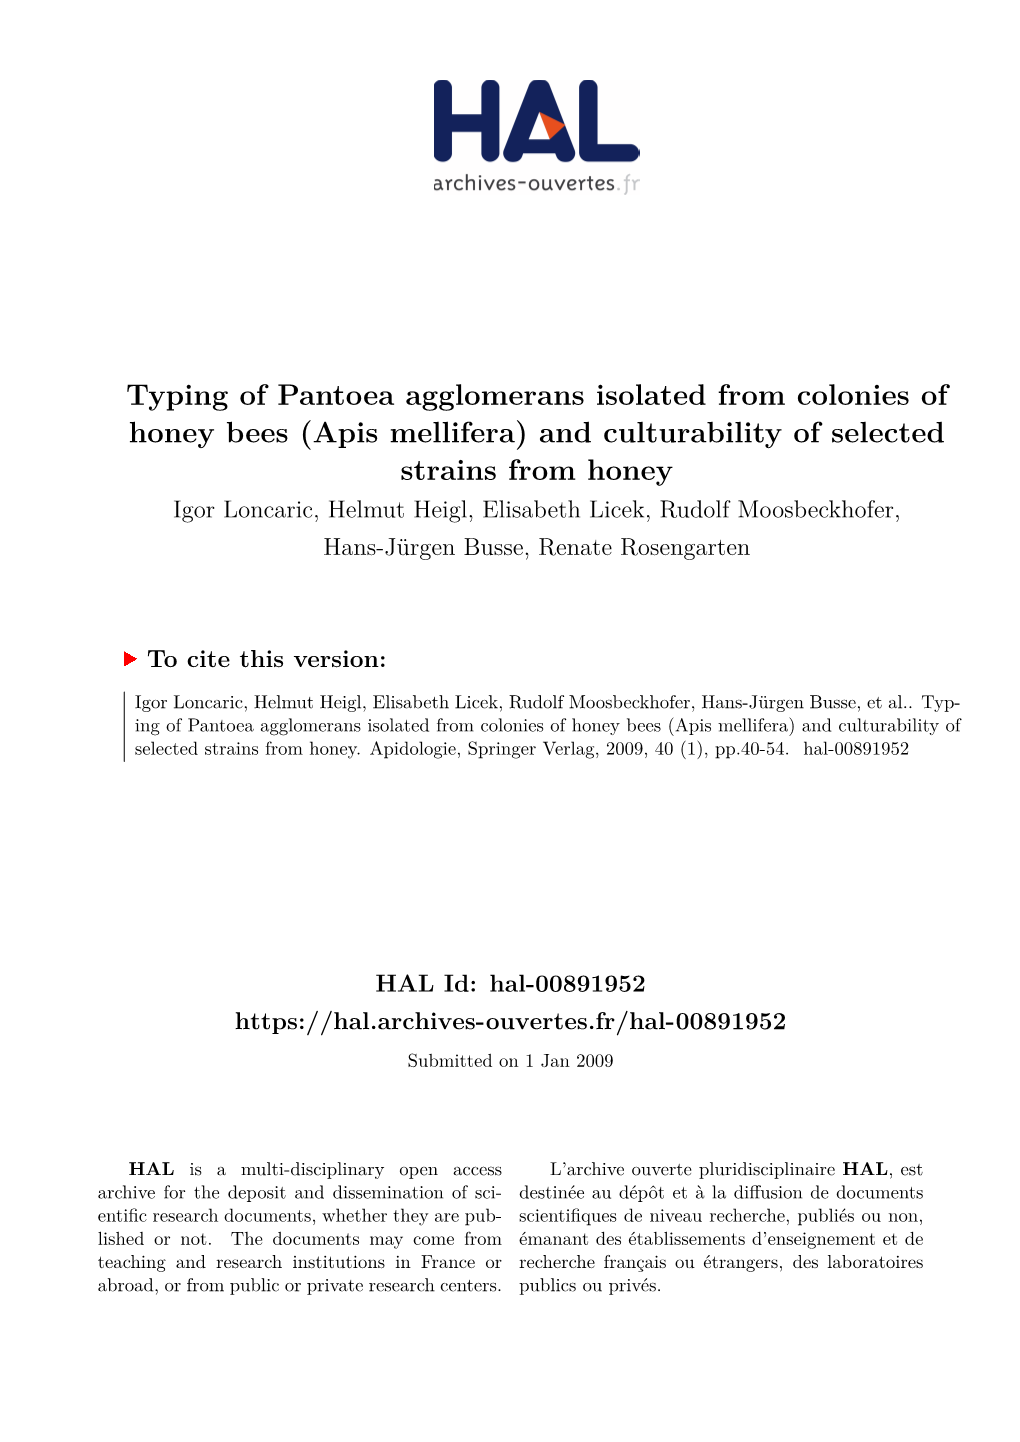 Typing of Pantoea Agglomerans Isolated from Colonies of Honey Bees